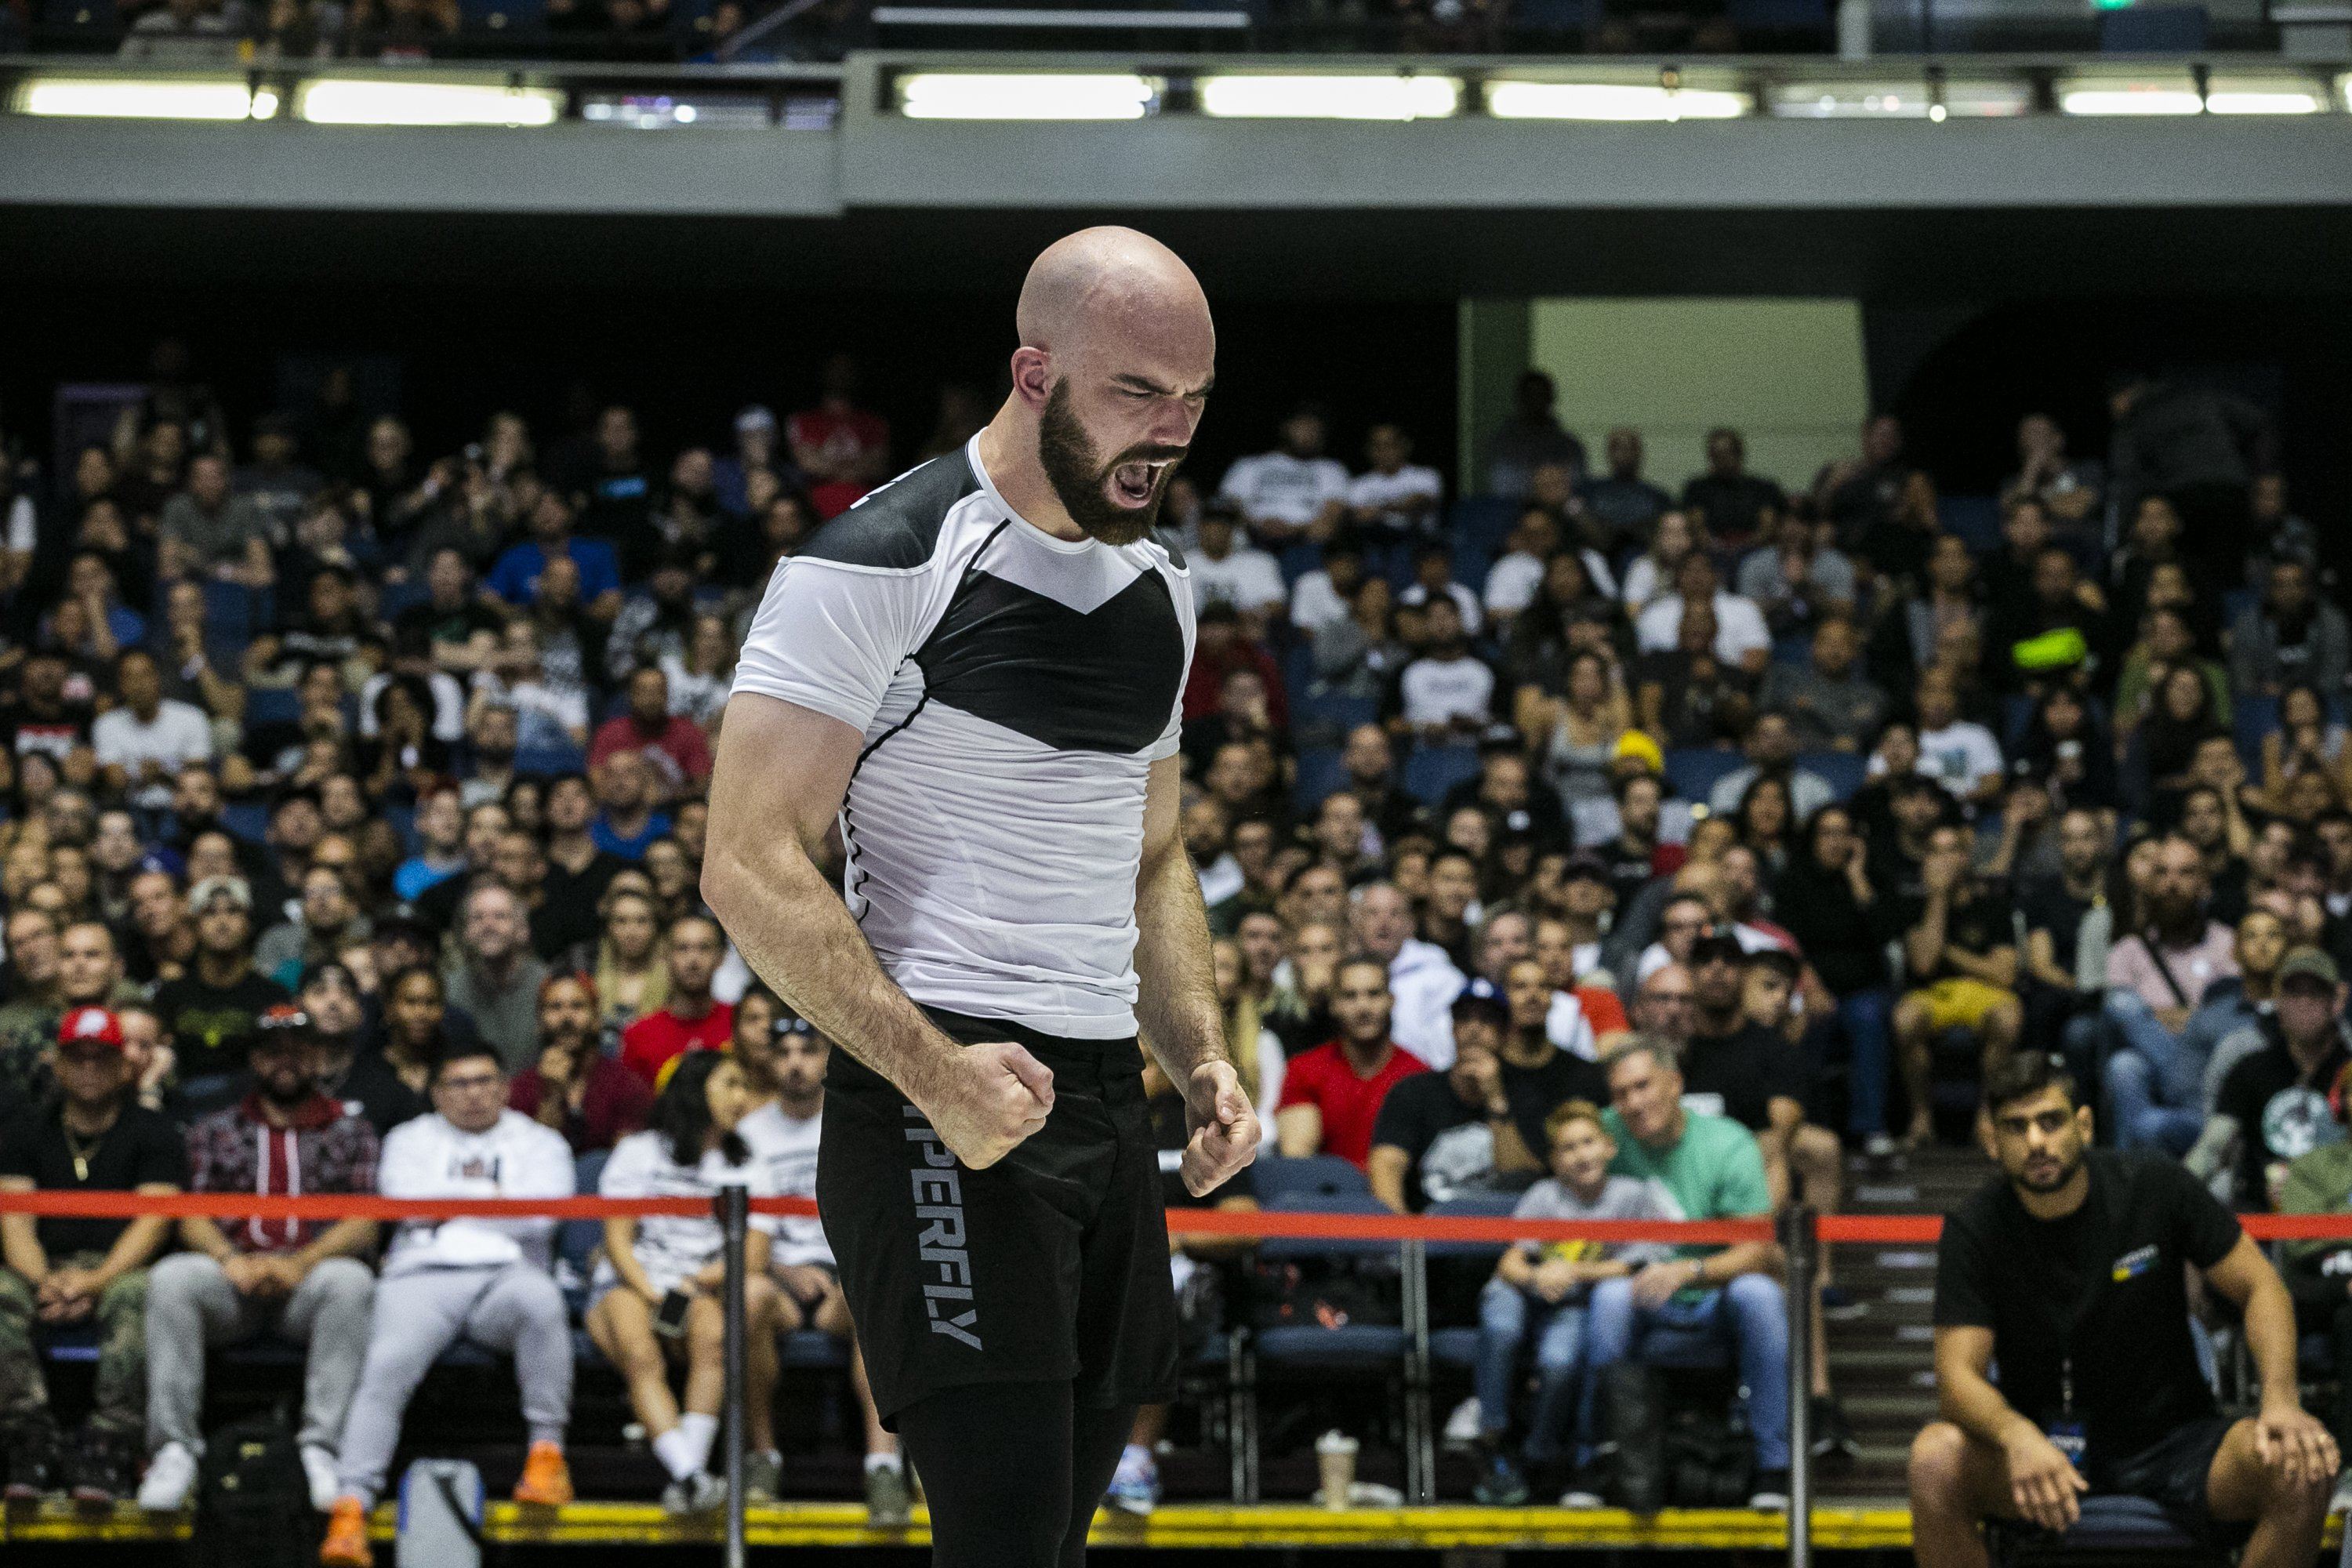 Hyperfly 2019 No-Gi Worlds Preview